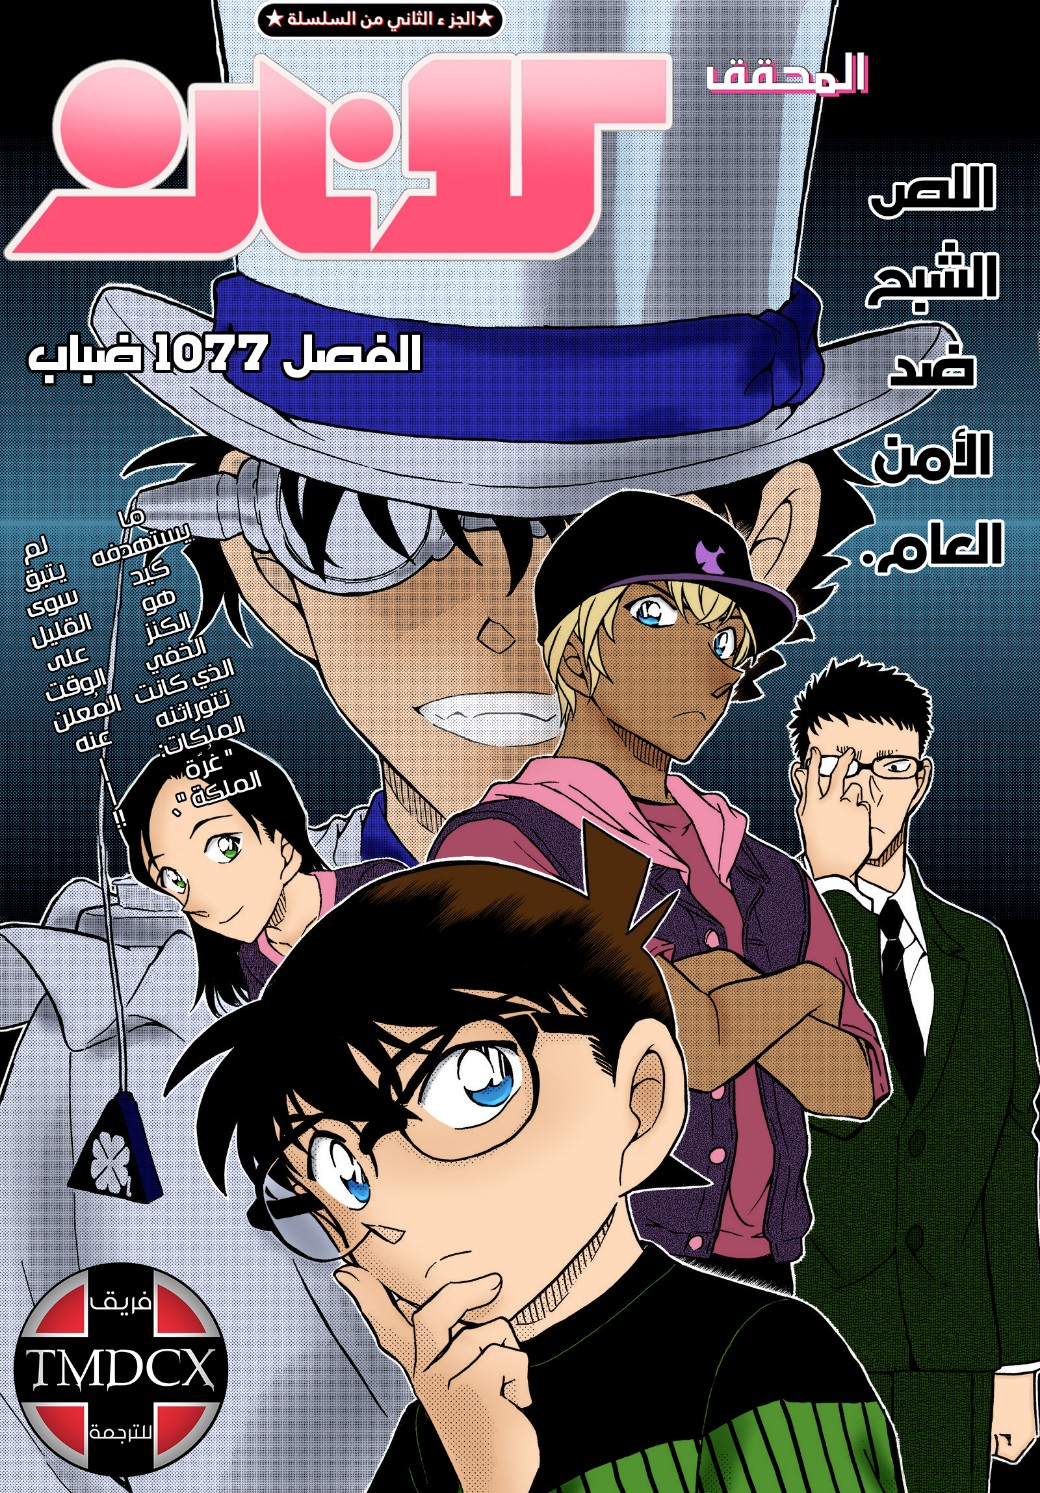 Detective Conan: Chapter 1077 - Page 1